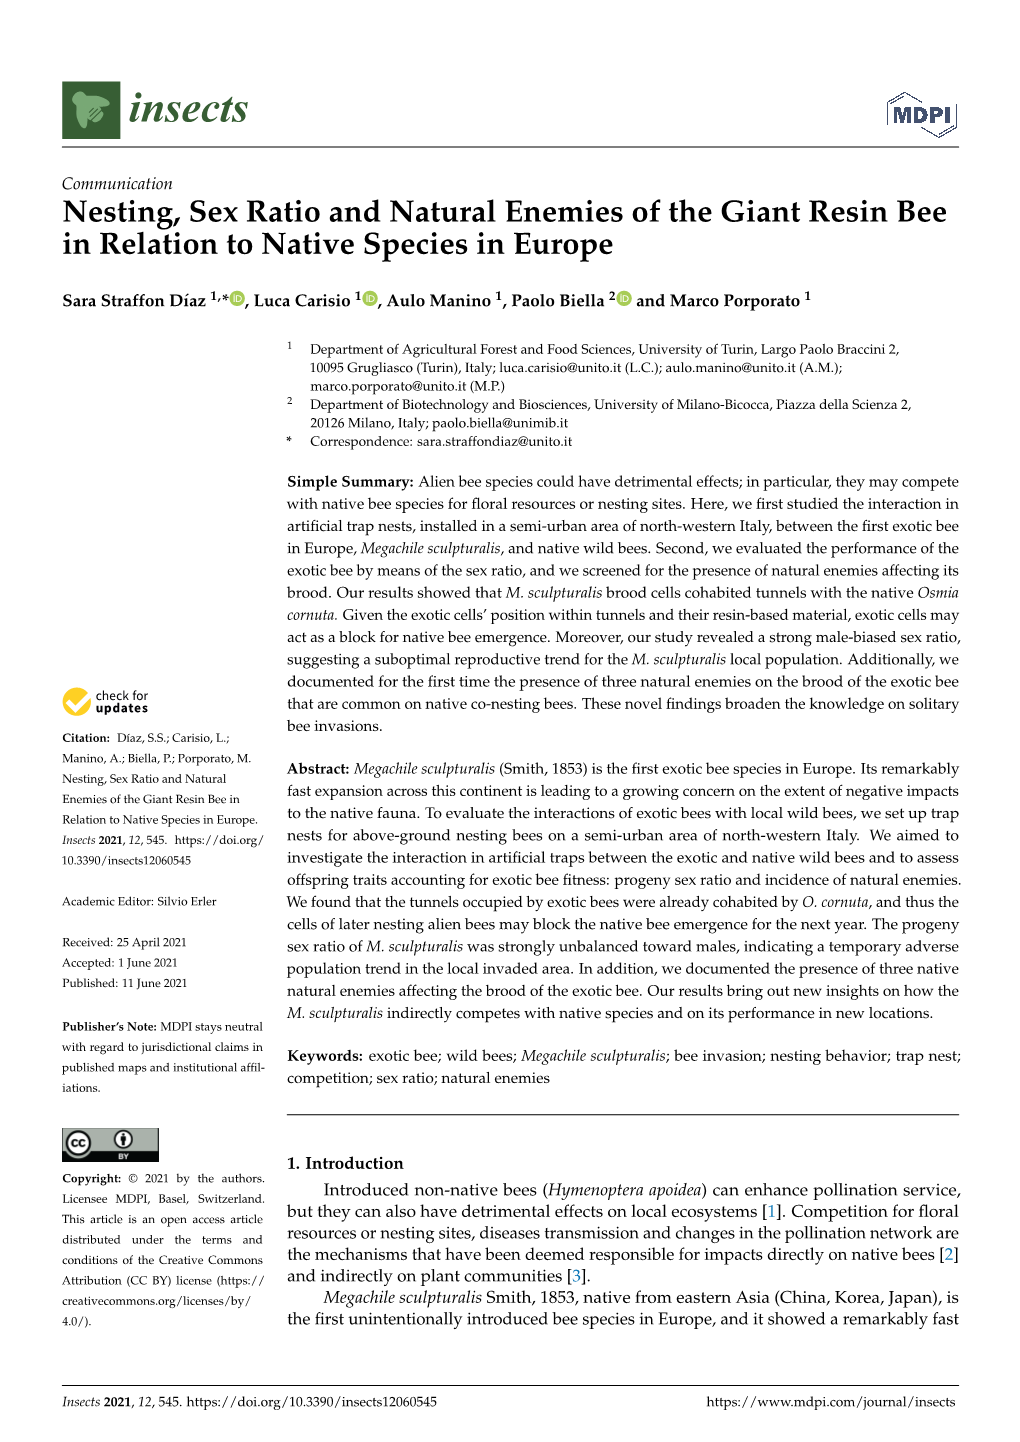 Nesting, Sex Ratio and Natural Enemies of the Giant Resin Bee in Relation to Native Species in Europe